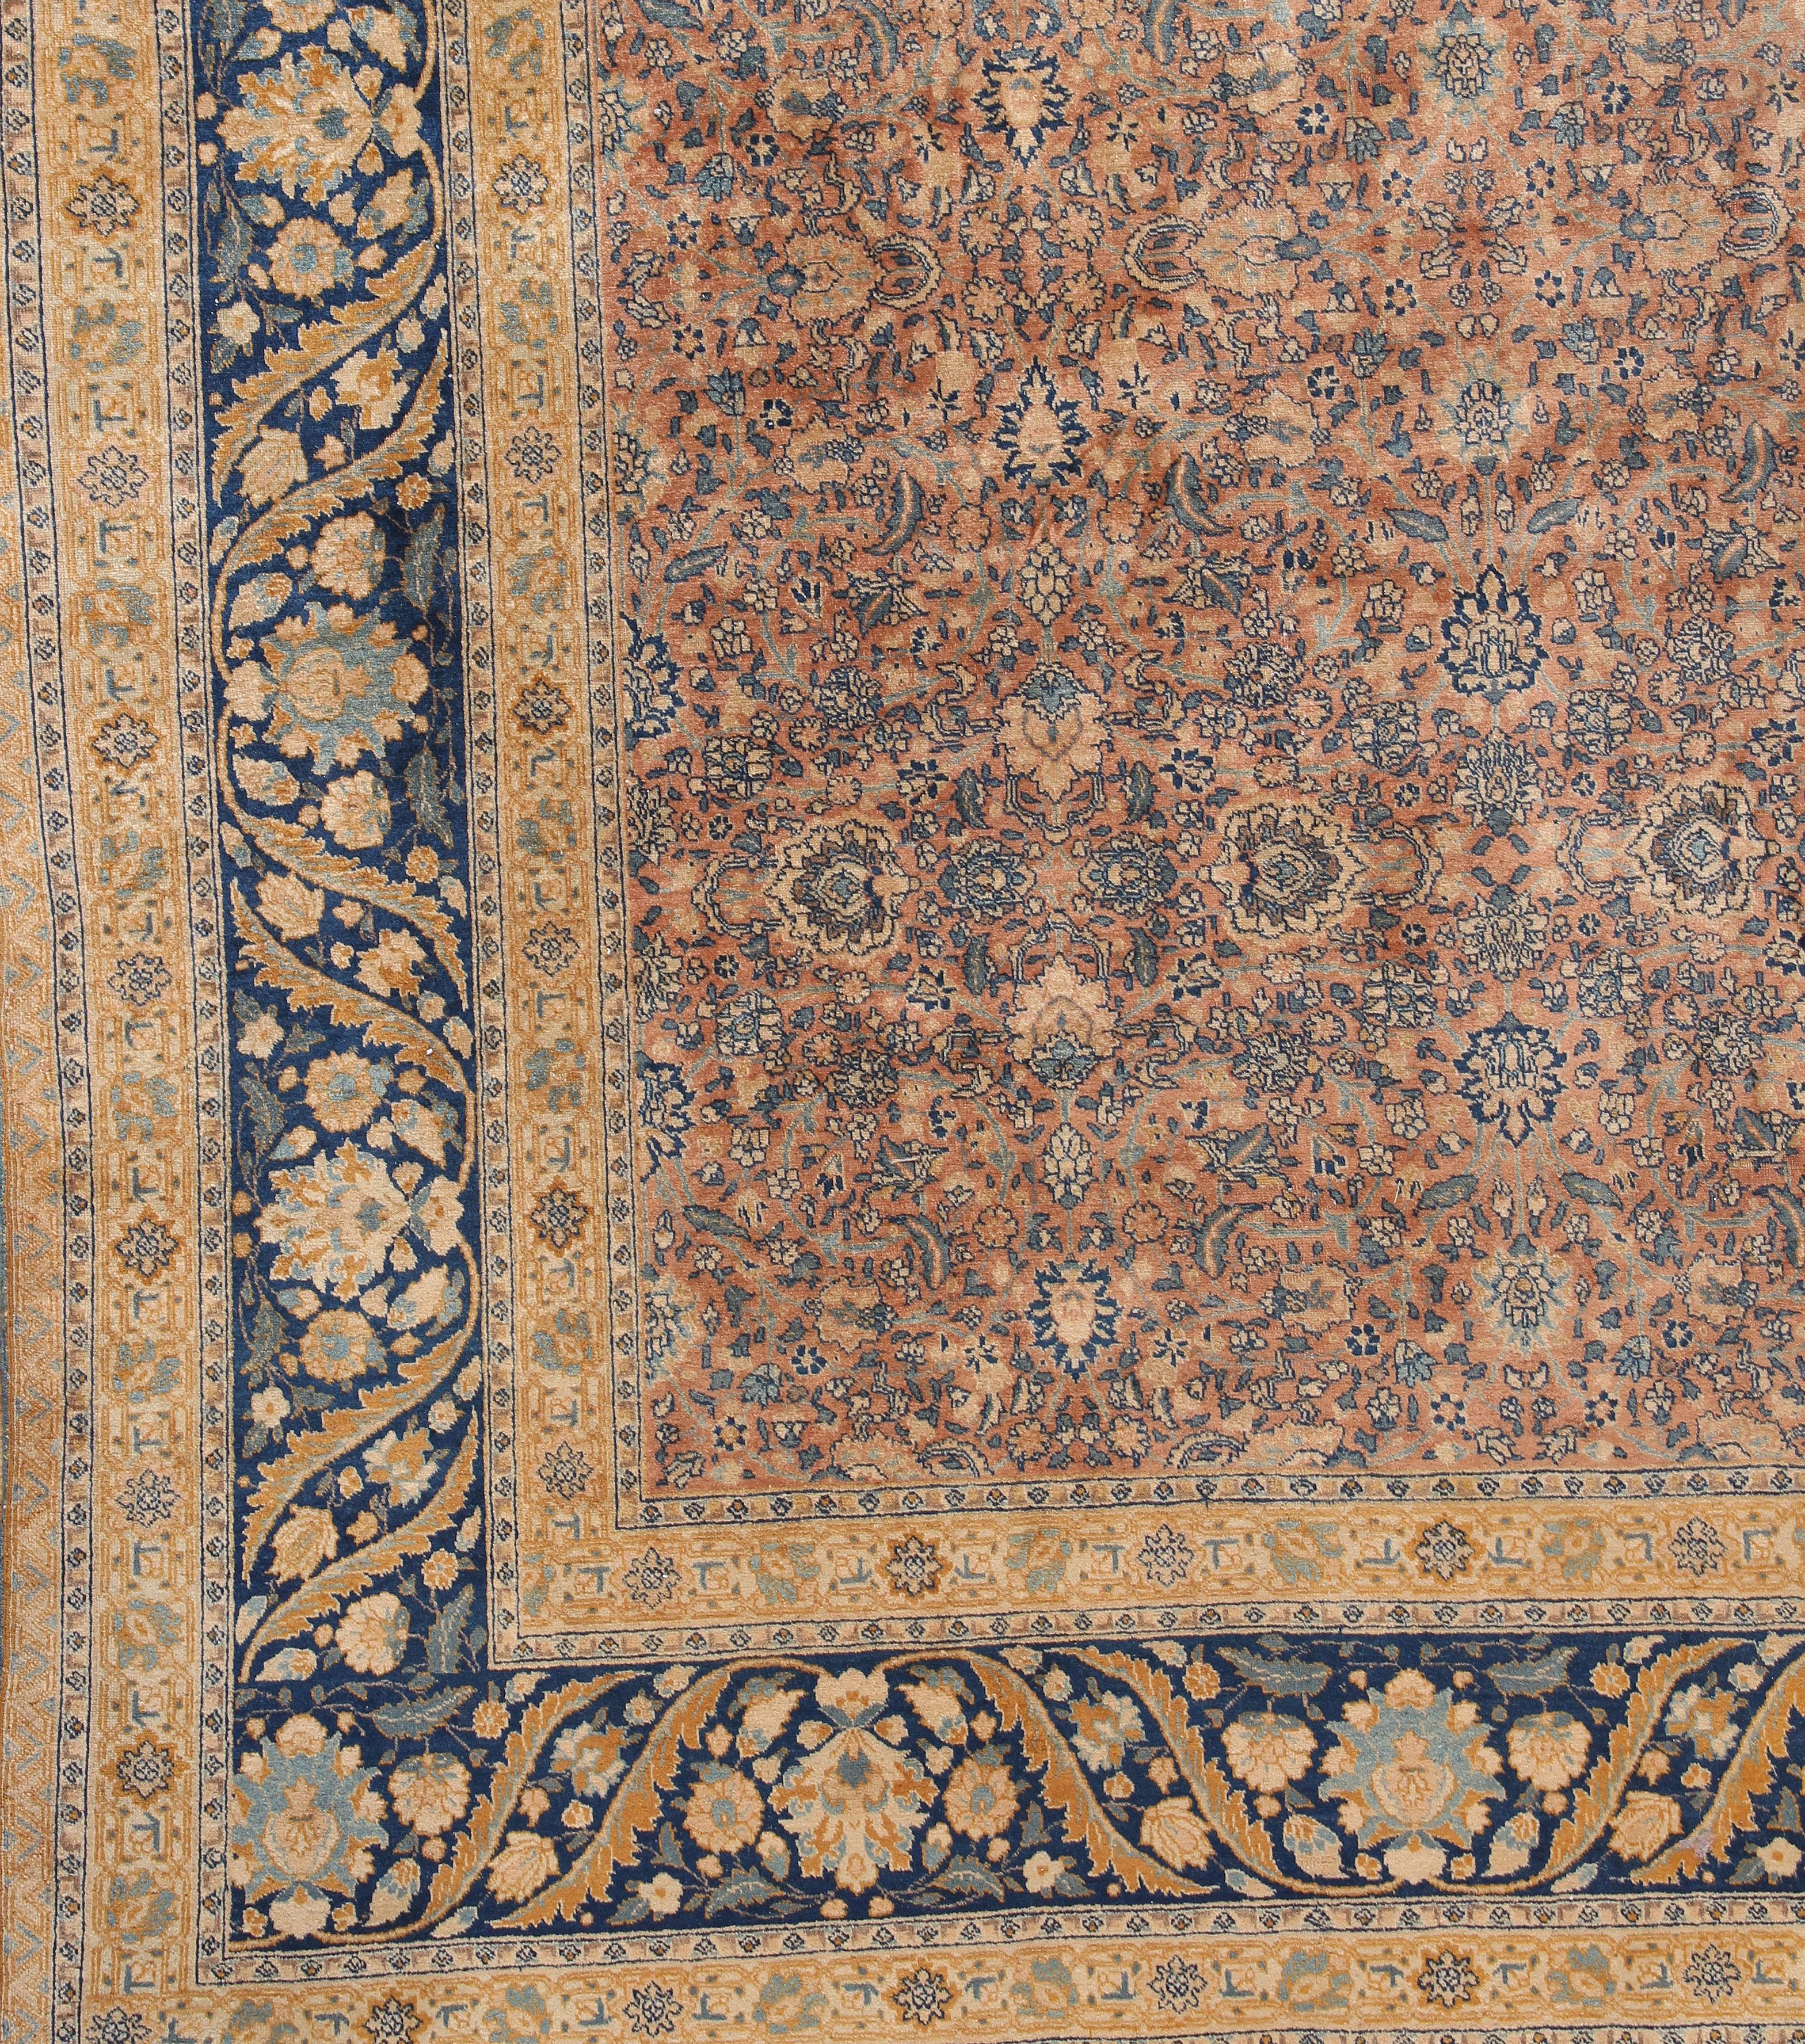 Antique Persian Tabriz rug, circa 1900, measures: 10'10 x 13'9. Tabriz is the capital of the North-western province of Azerbaijan in Northwest Persia and for centuries has enjoyed a great reputation as a centre of Oriental culture. Genghis Kahn